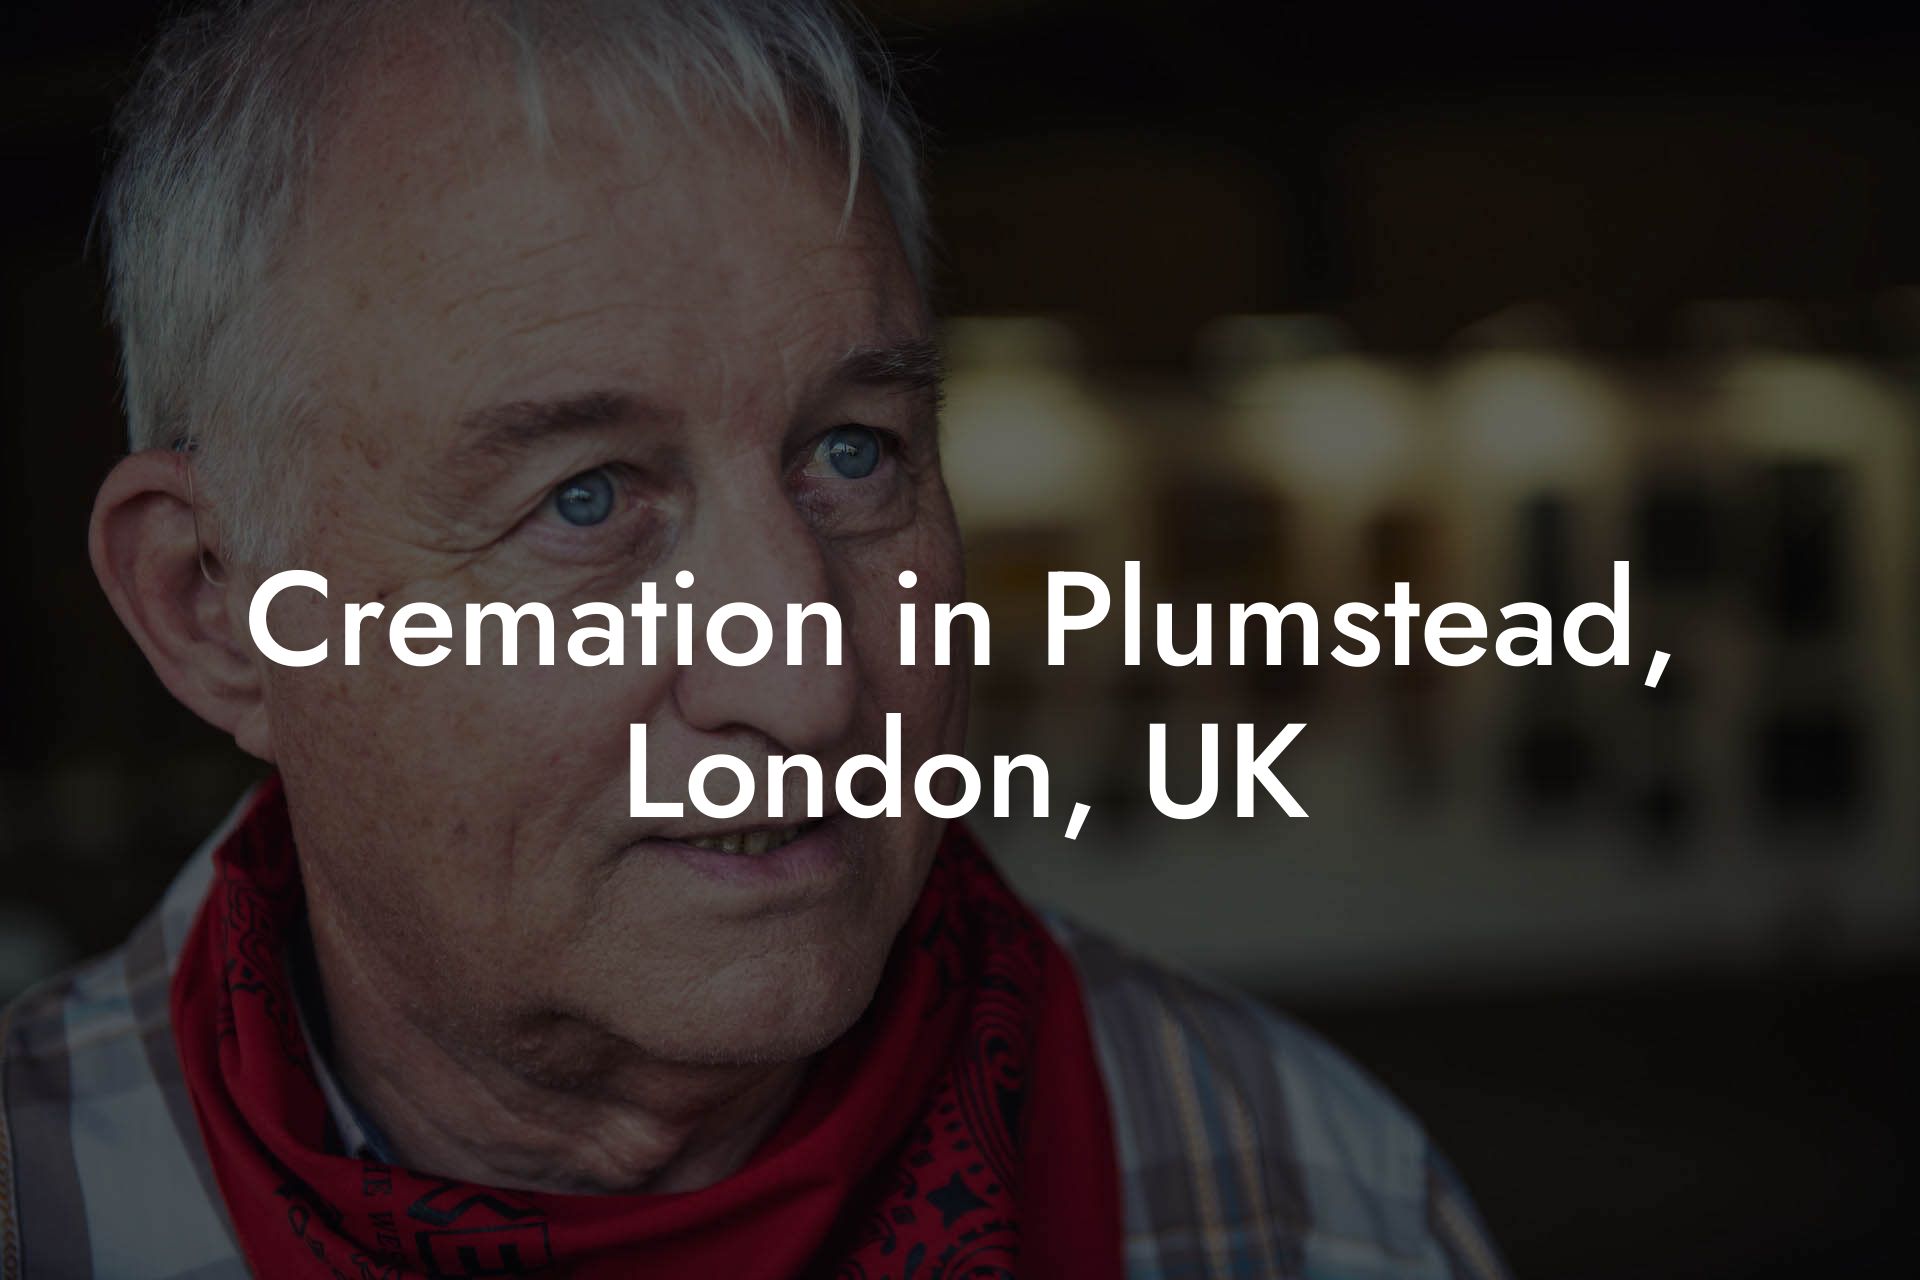 Cremation in Plumstead, London, UK